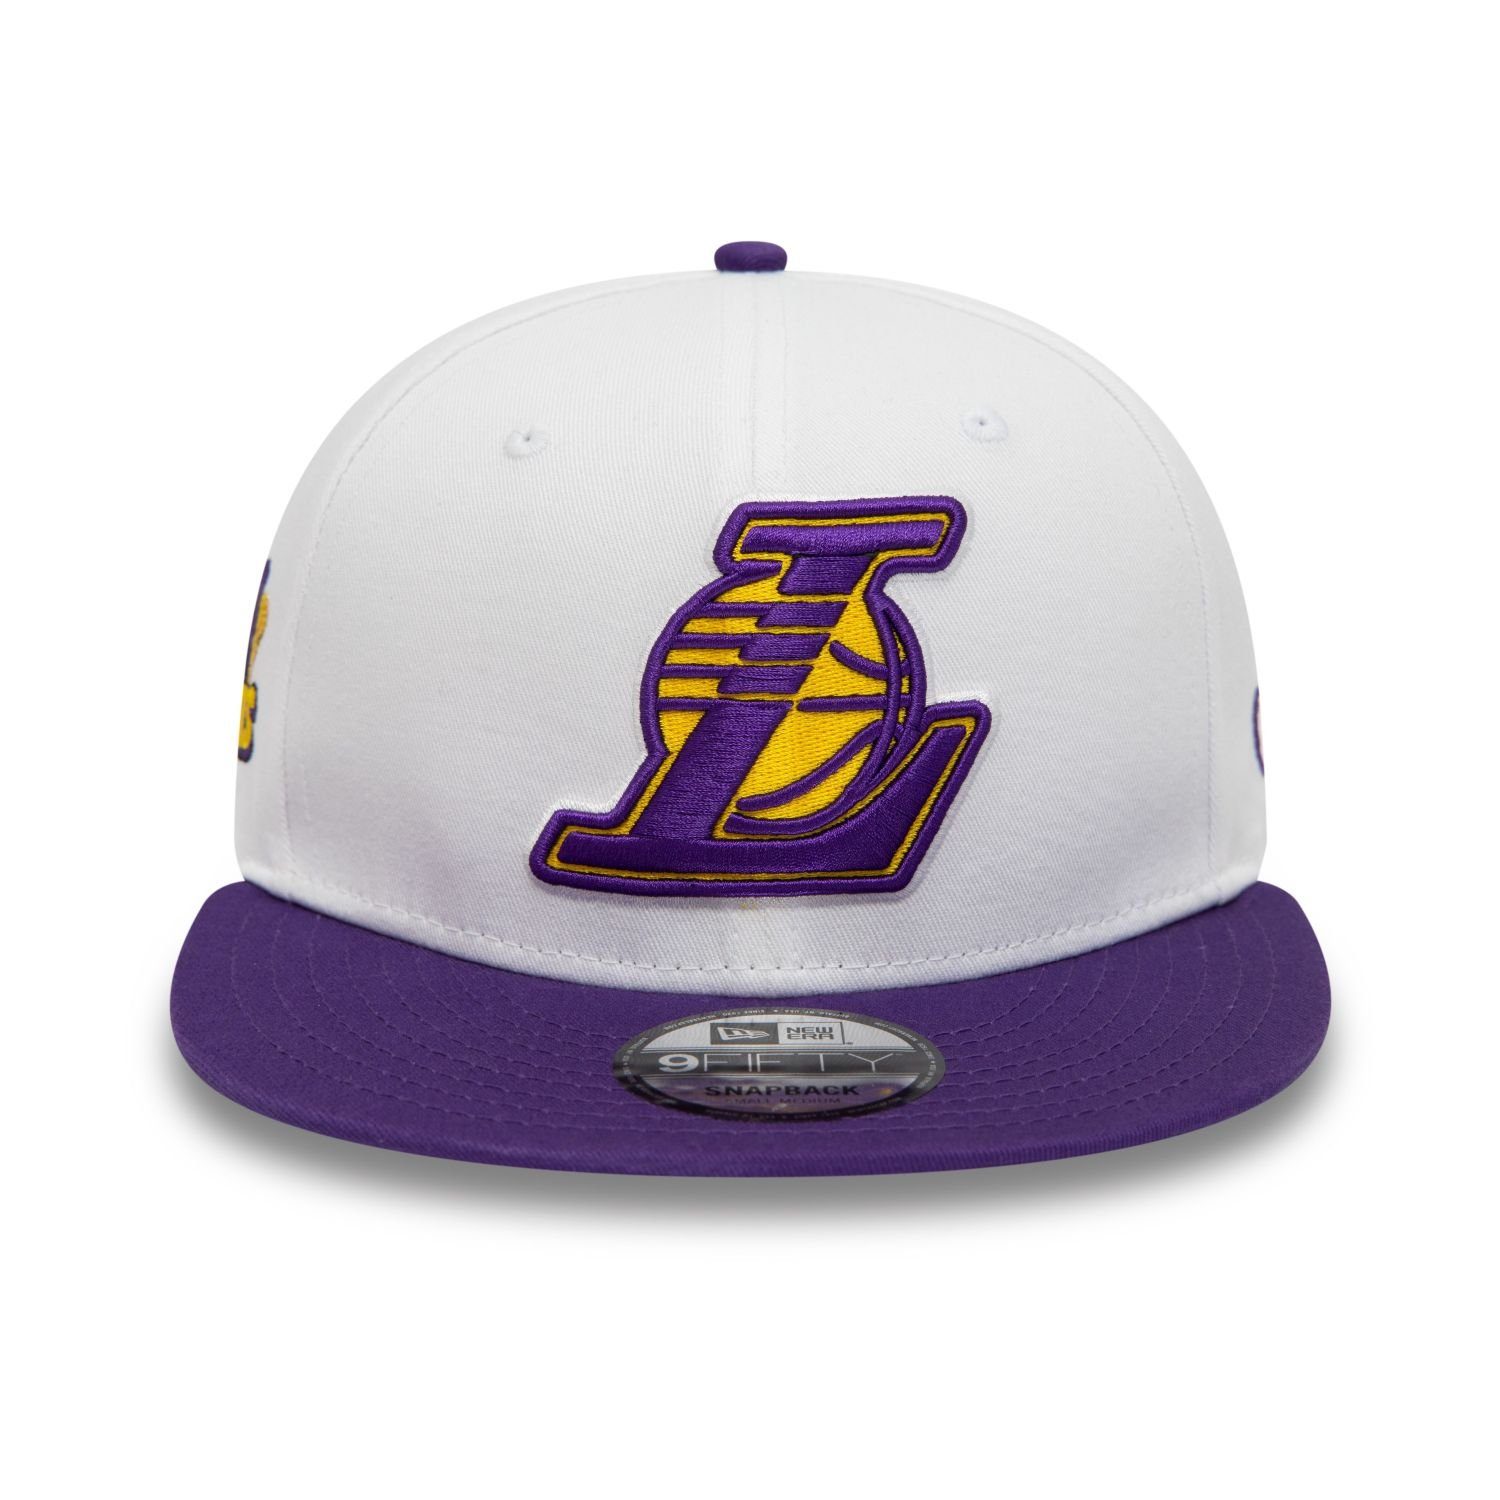 Era New PATCH Angeles Lakers Los Snapback SIDE Cap 9Fifty